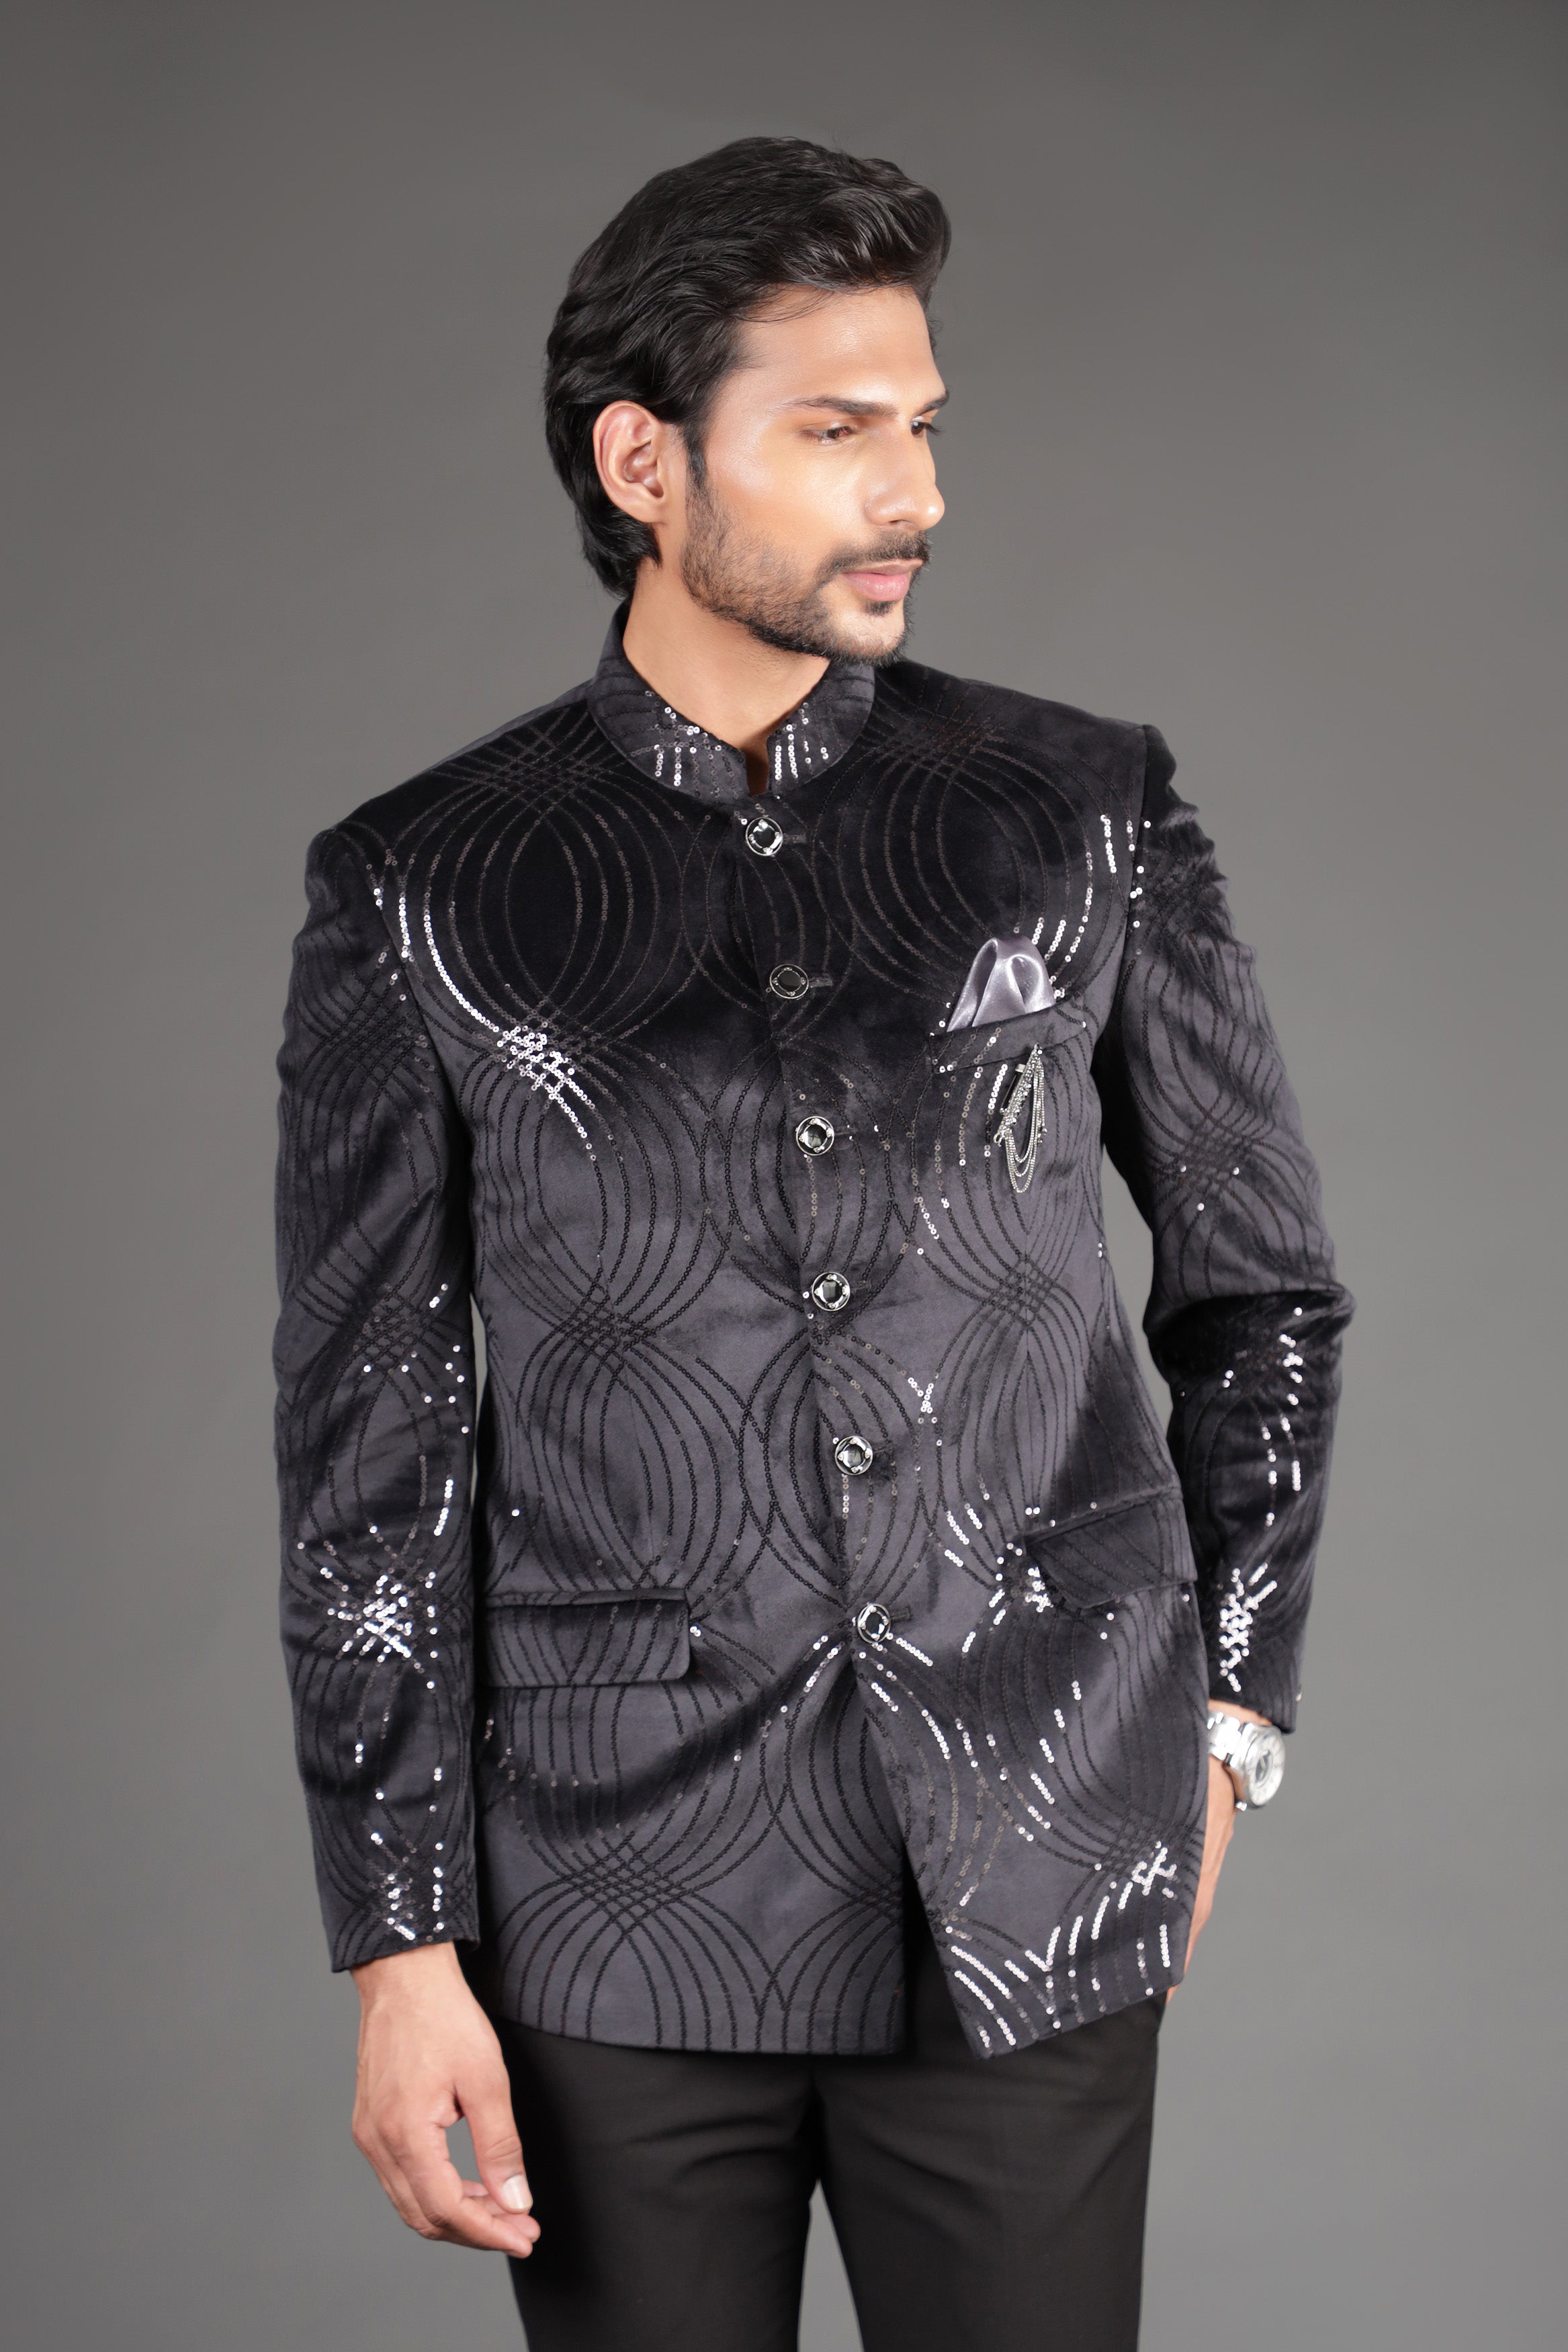 Buy Jodhpuri Suit for Wedding at Best Prices– Mohanlal Sons